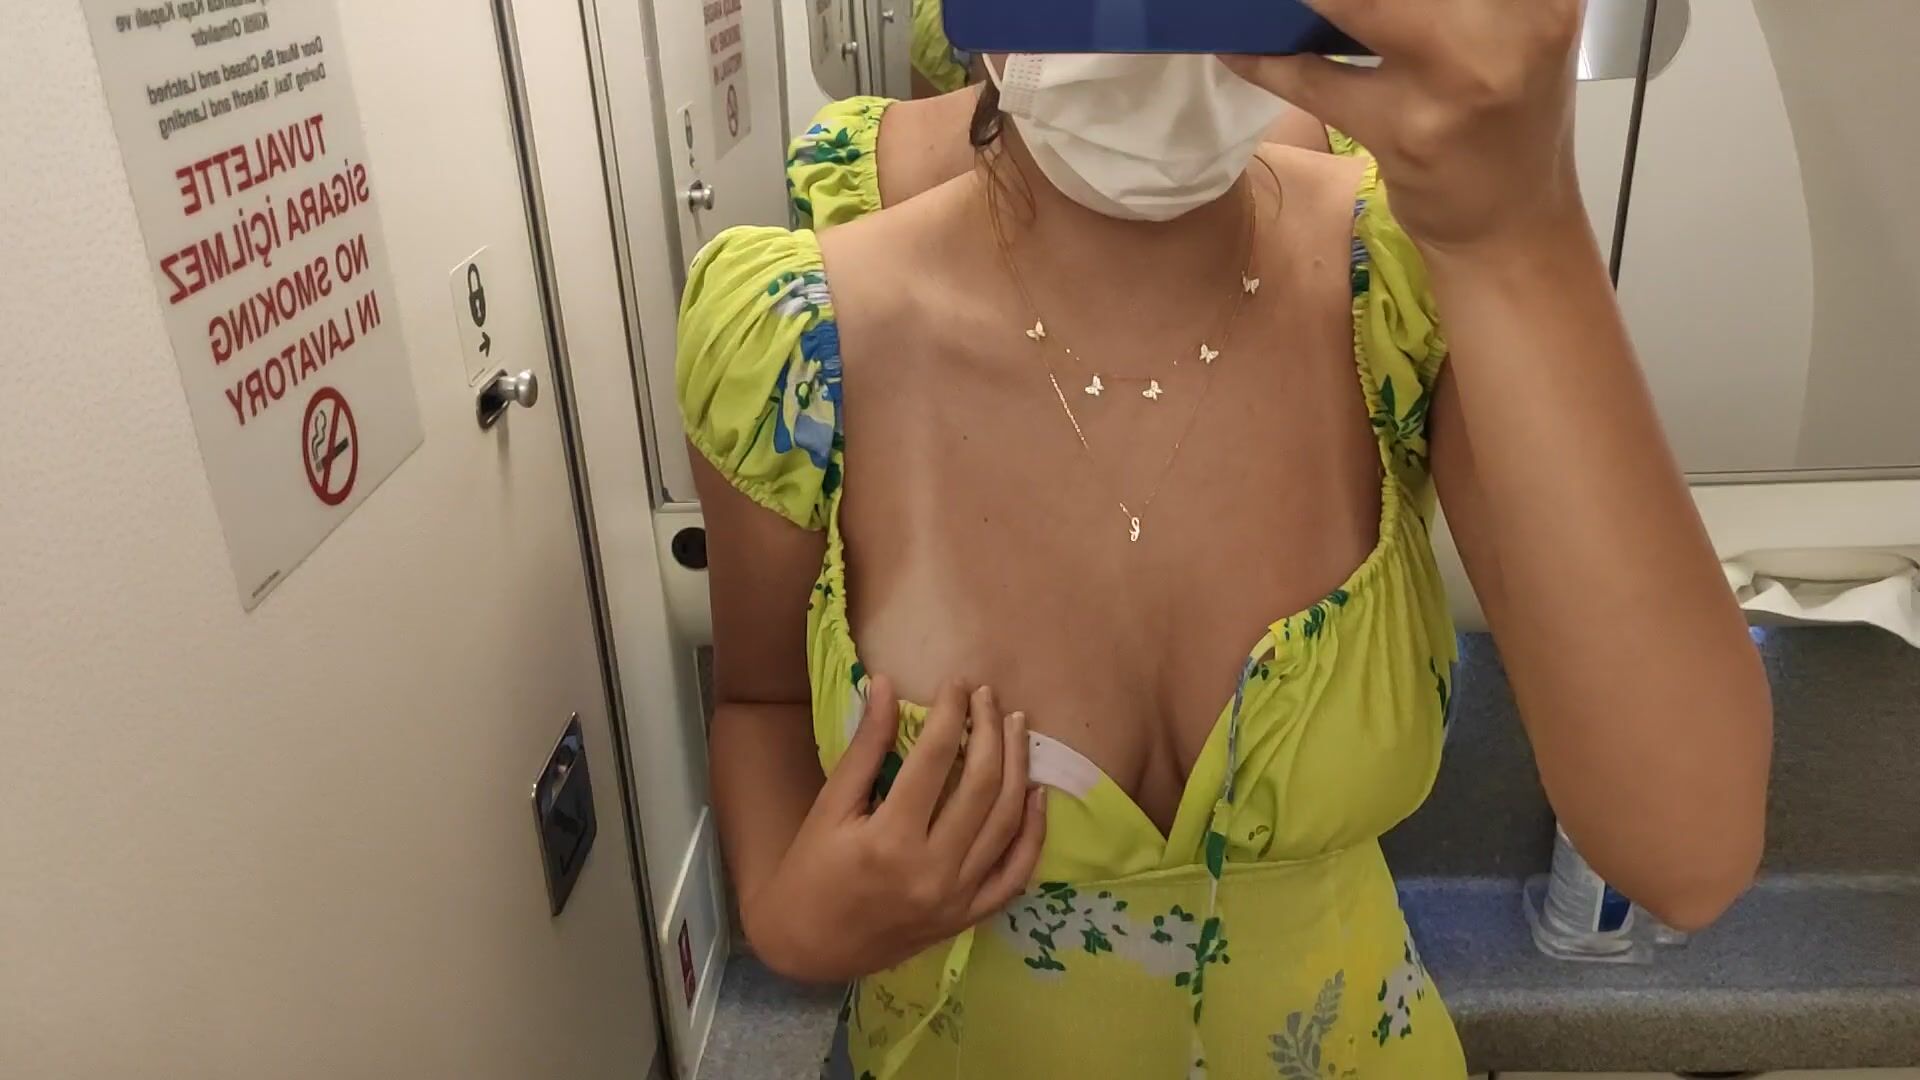 A turbulance would make my boobs bounce good in this dress lol